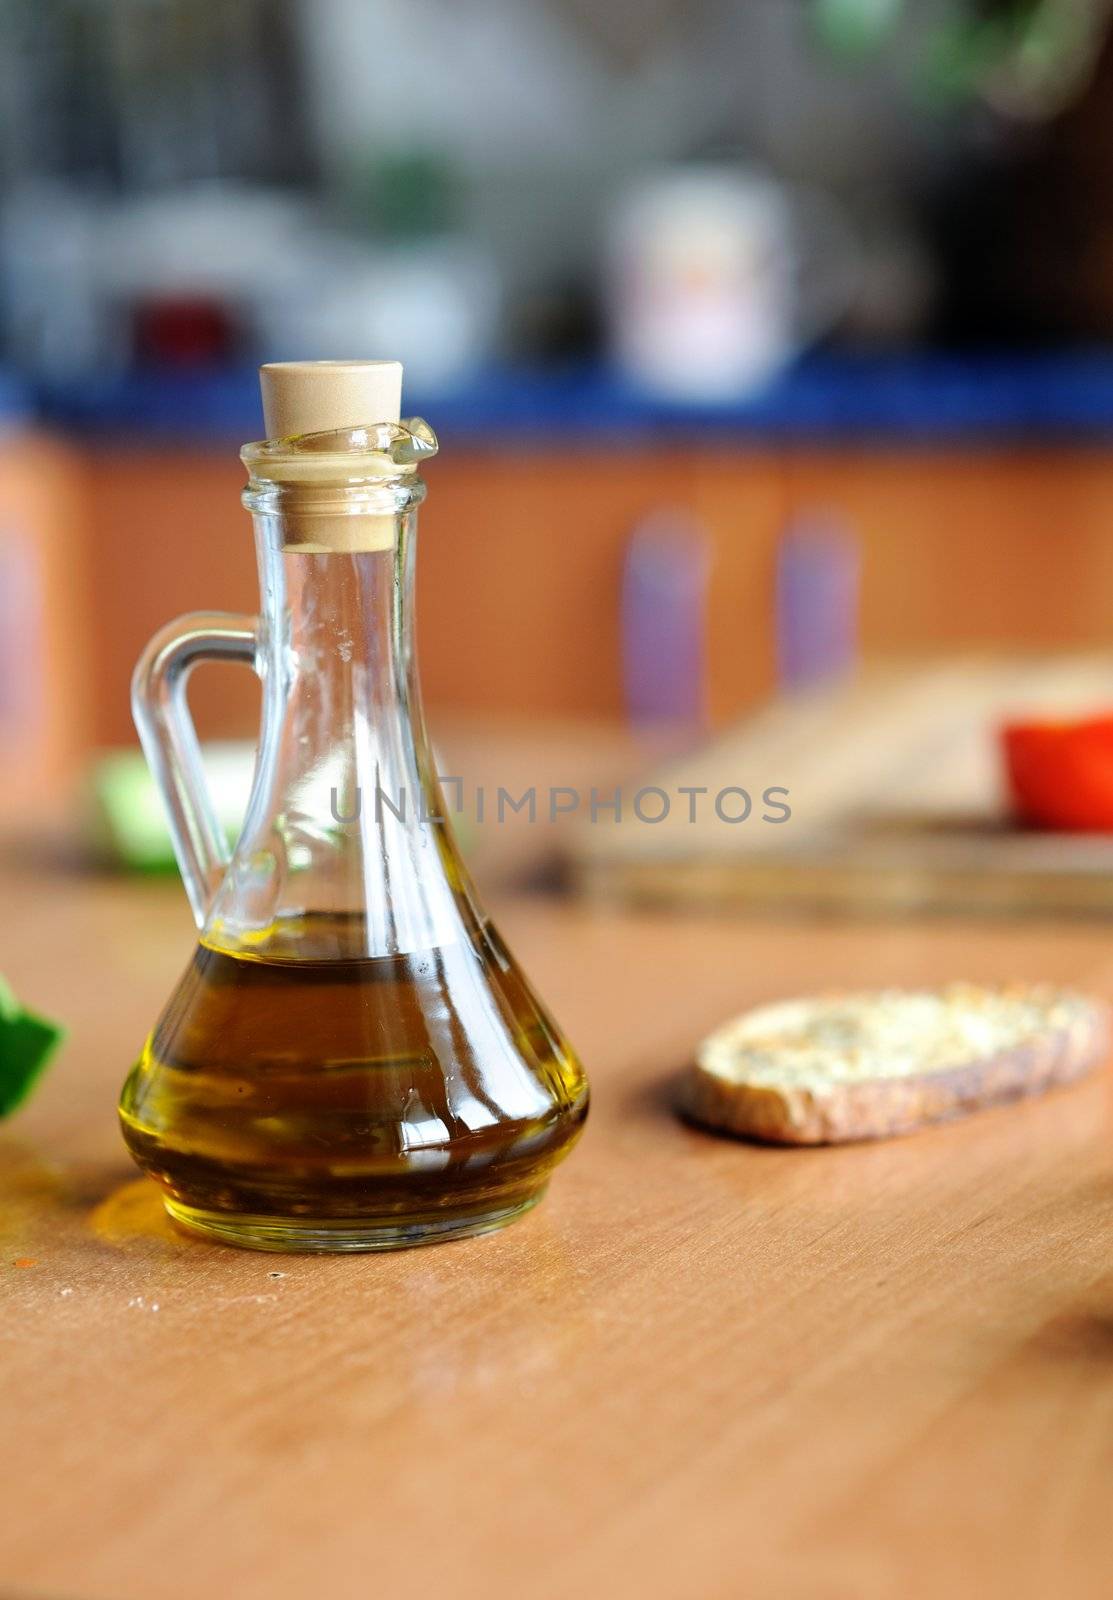 An image of a bottle of olive oil on the table